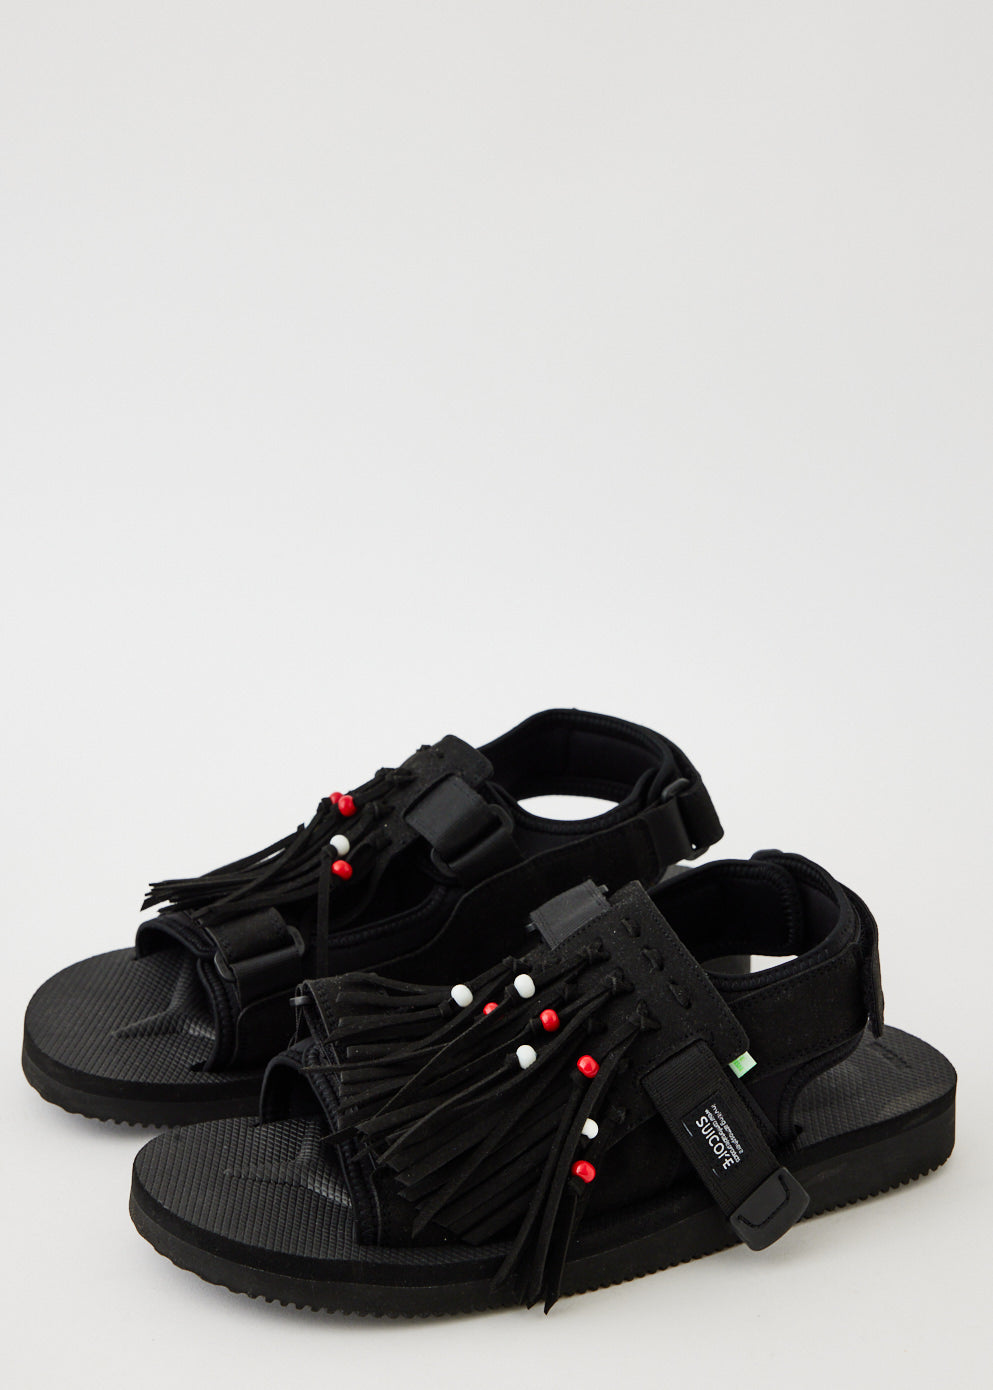 Was-4Ab Sandals